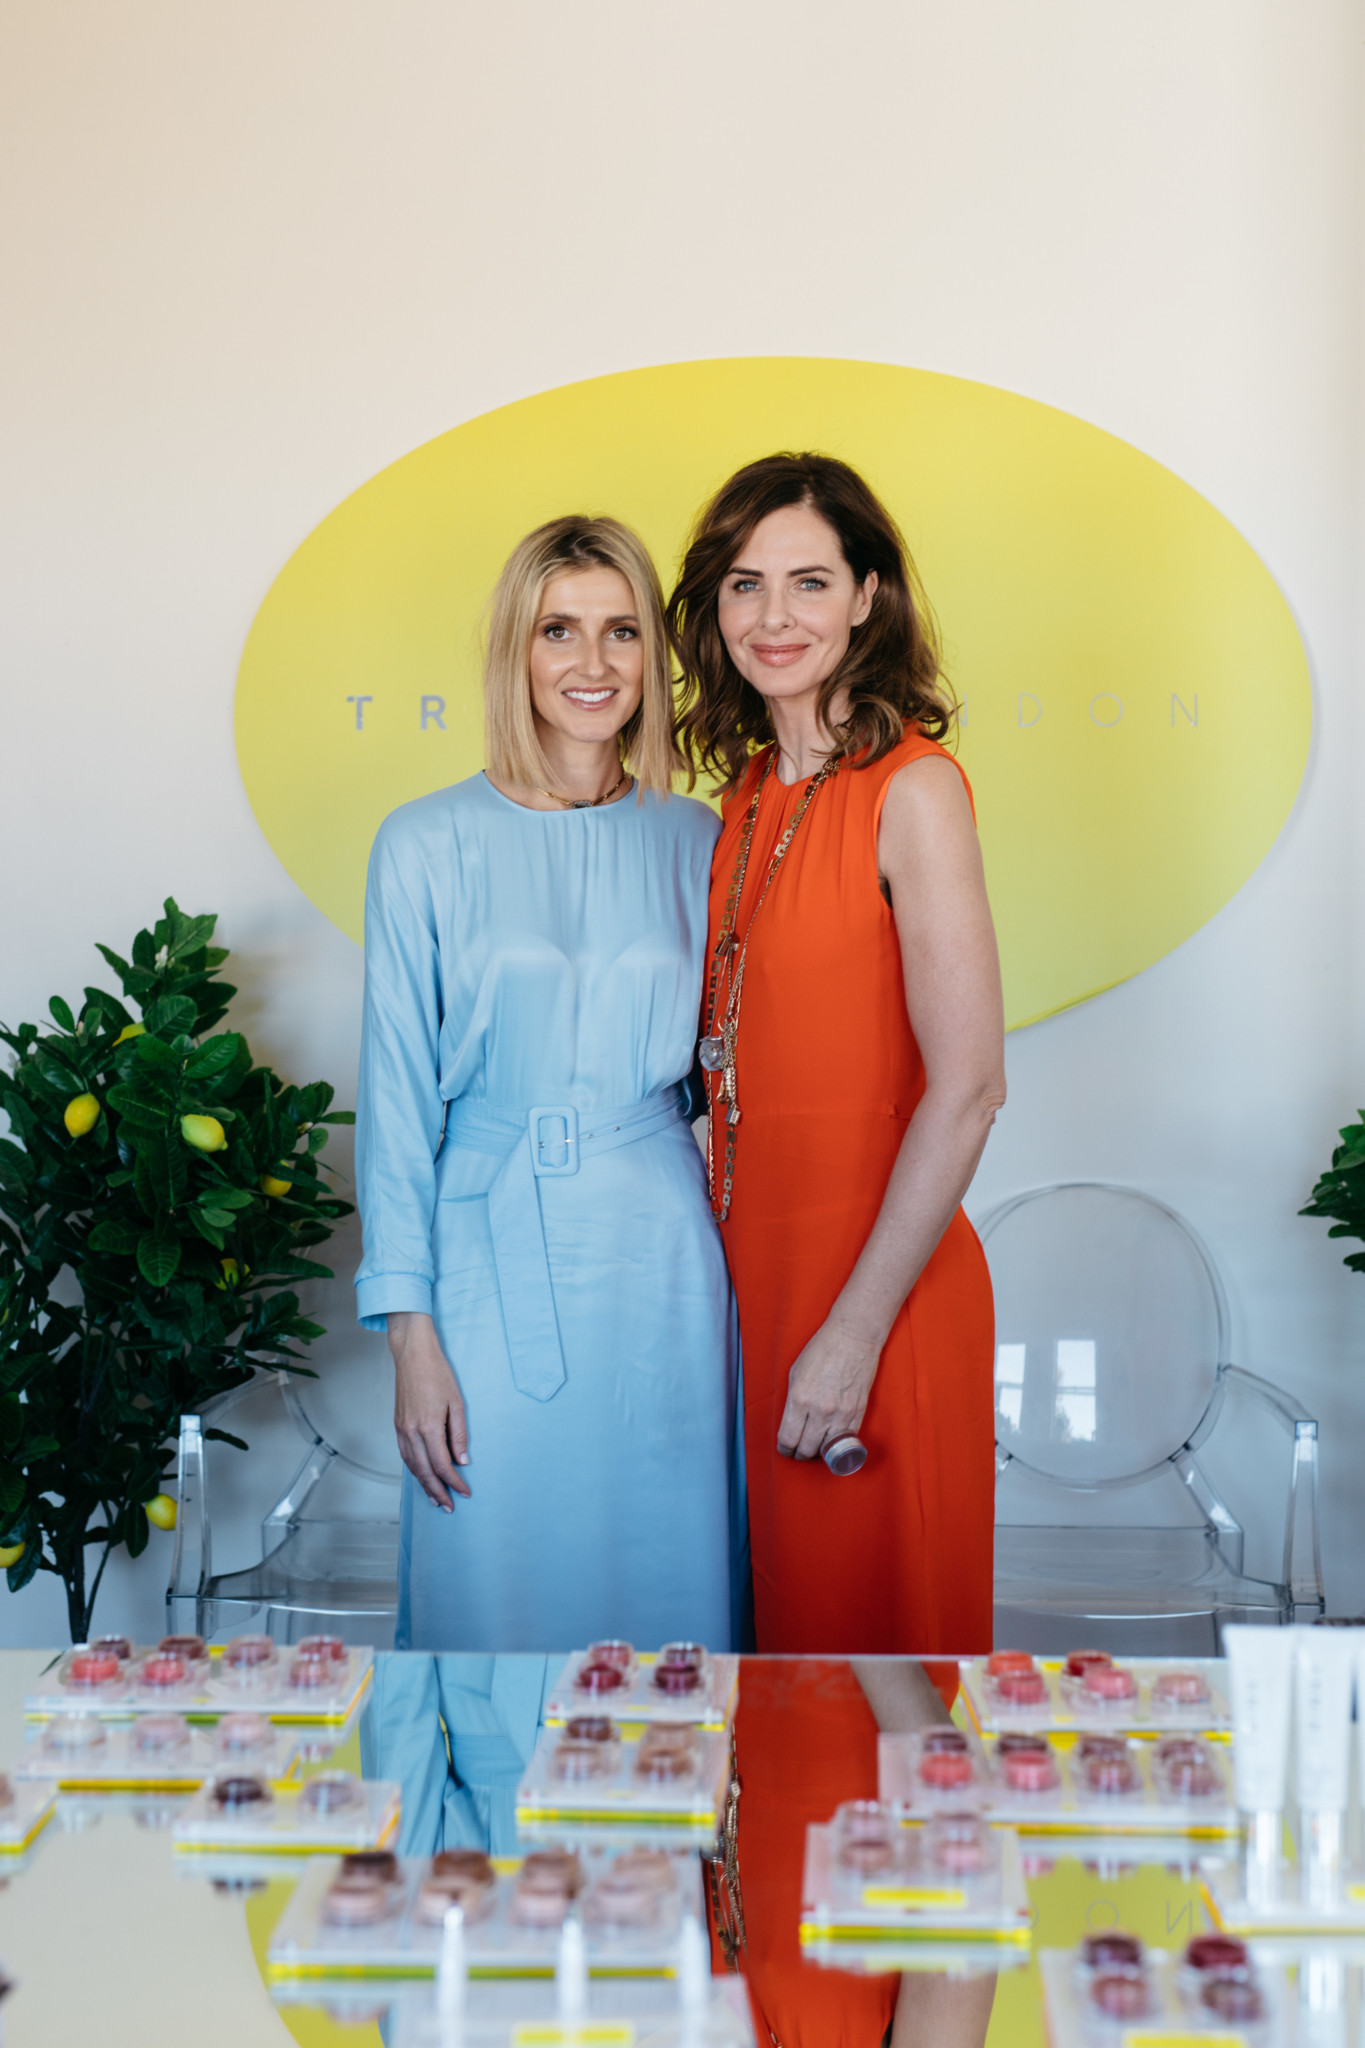 Date with Kate: Trinny Woodall - Kate Waterhouse